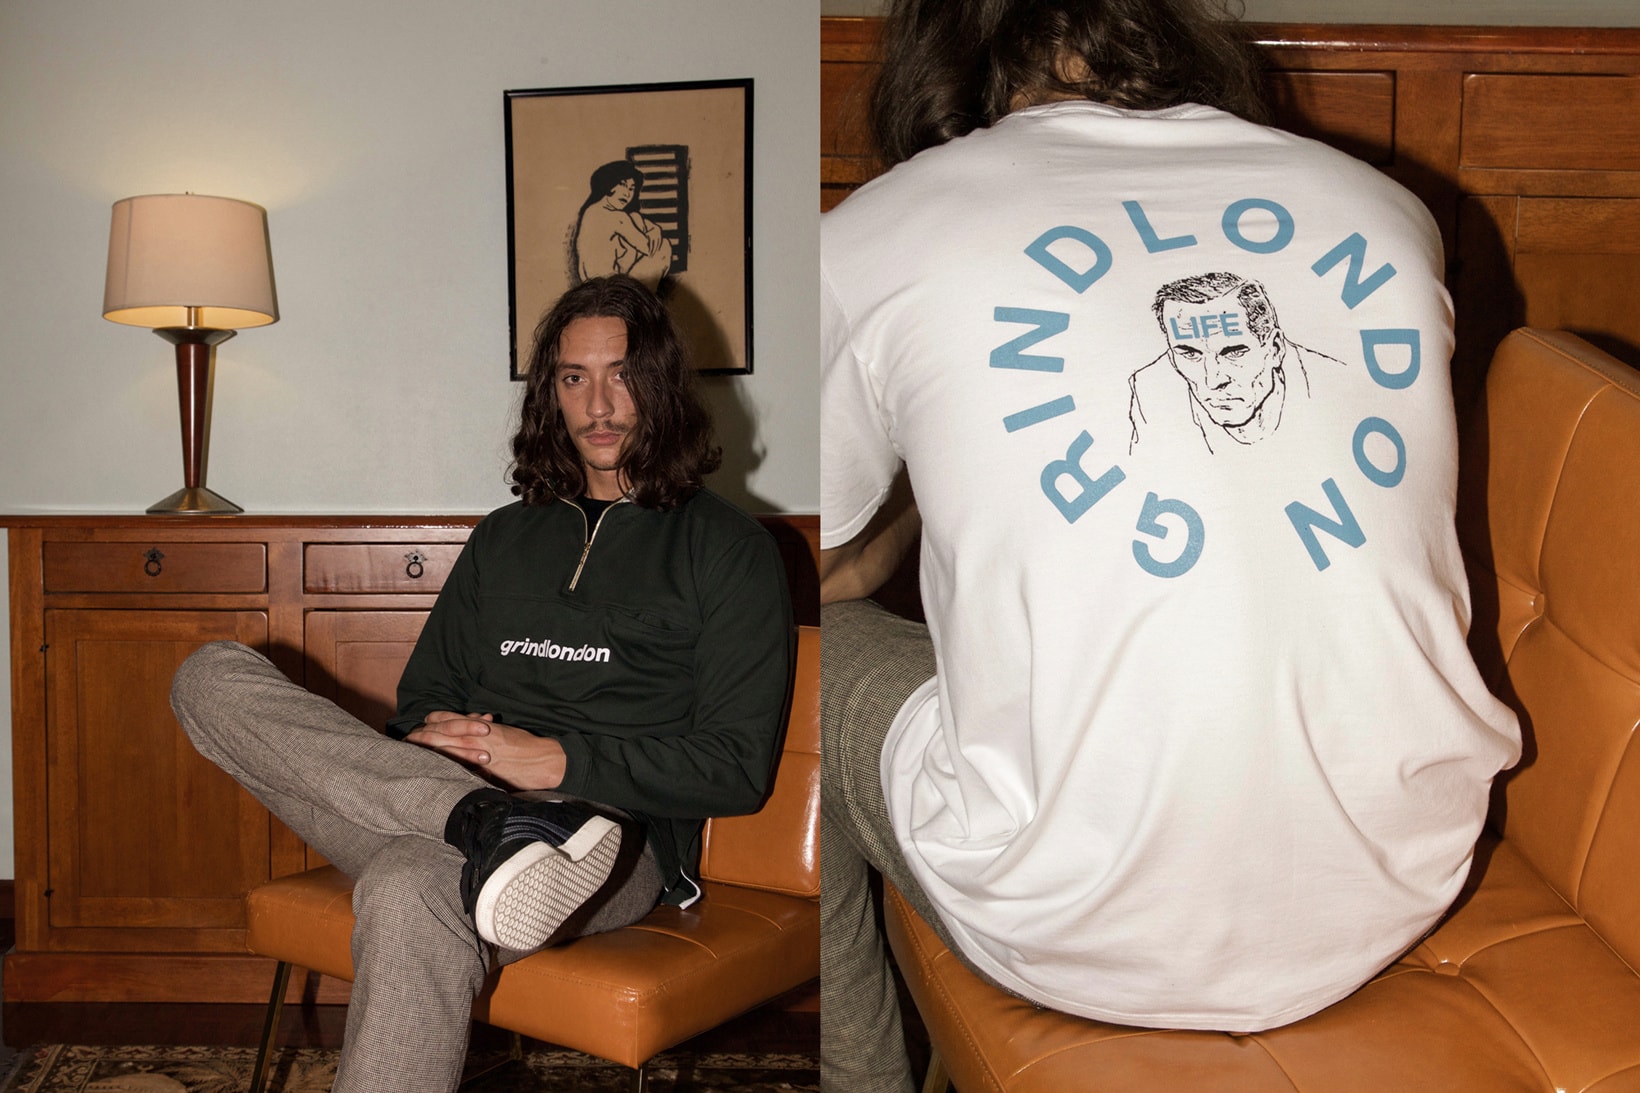 Grind London 2016 Fall/Winter Second Delivery